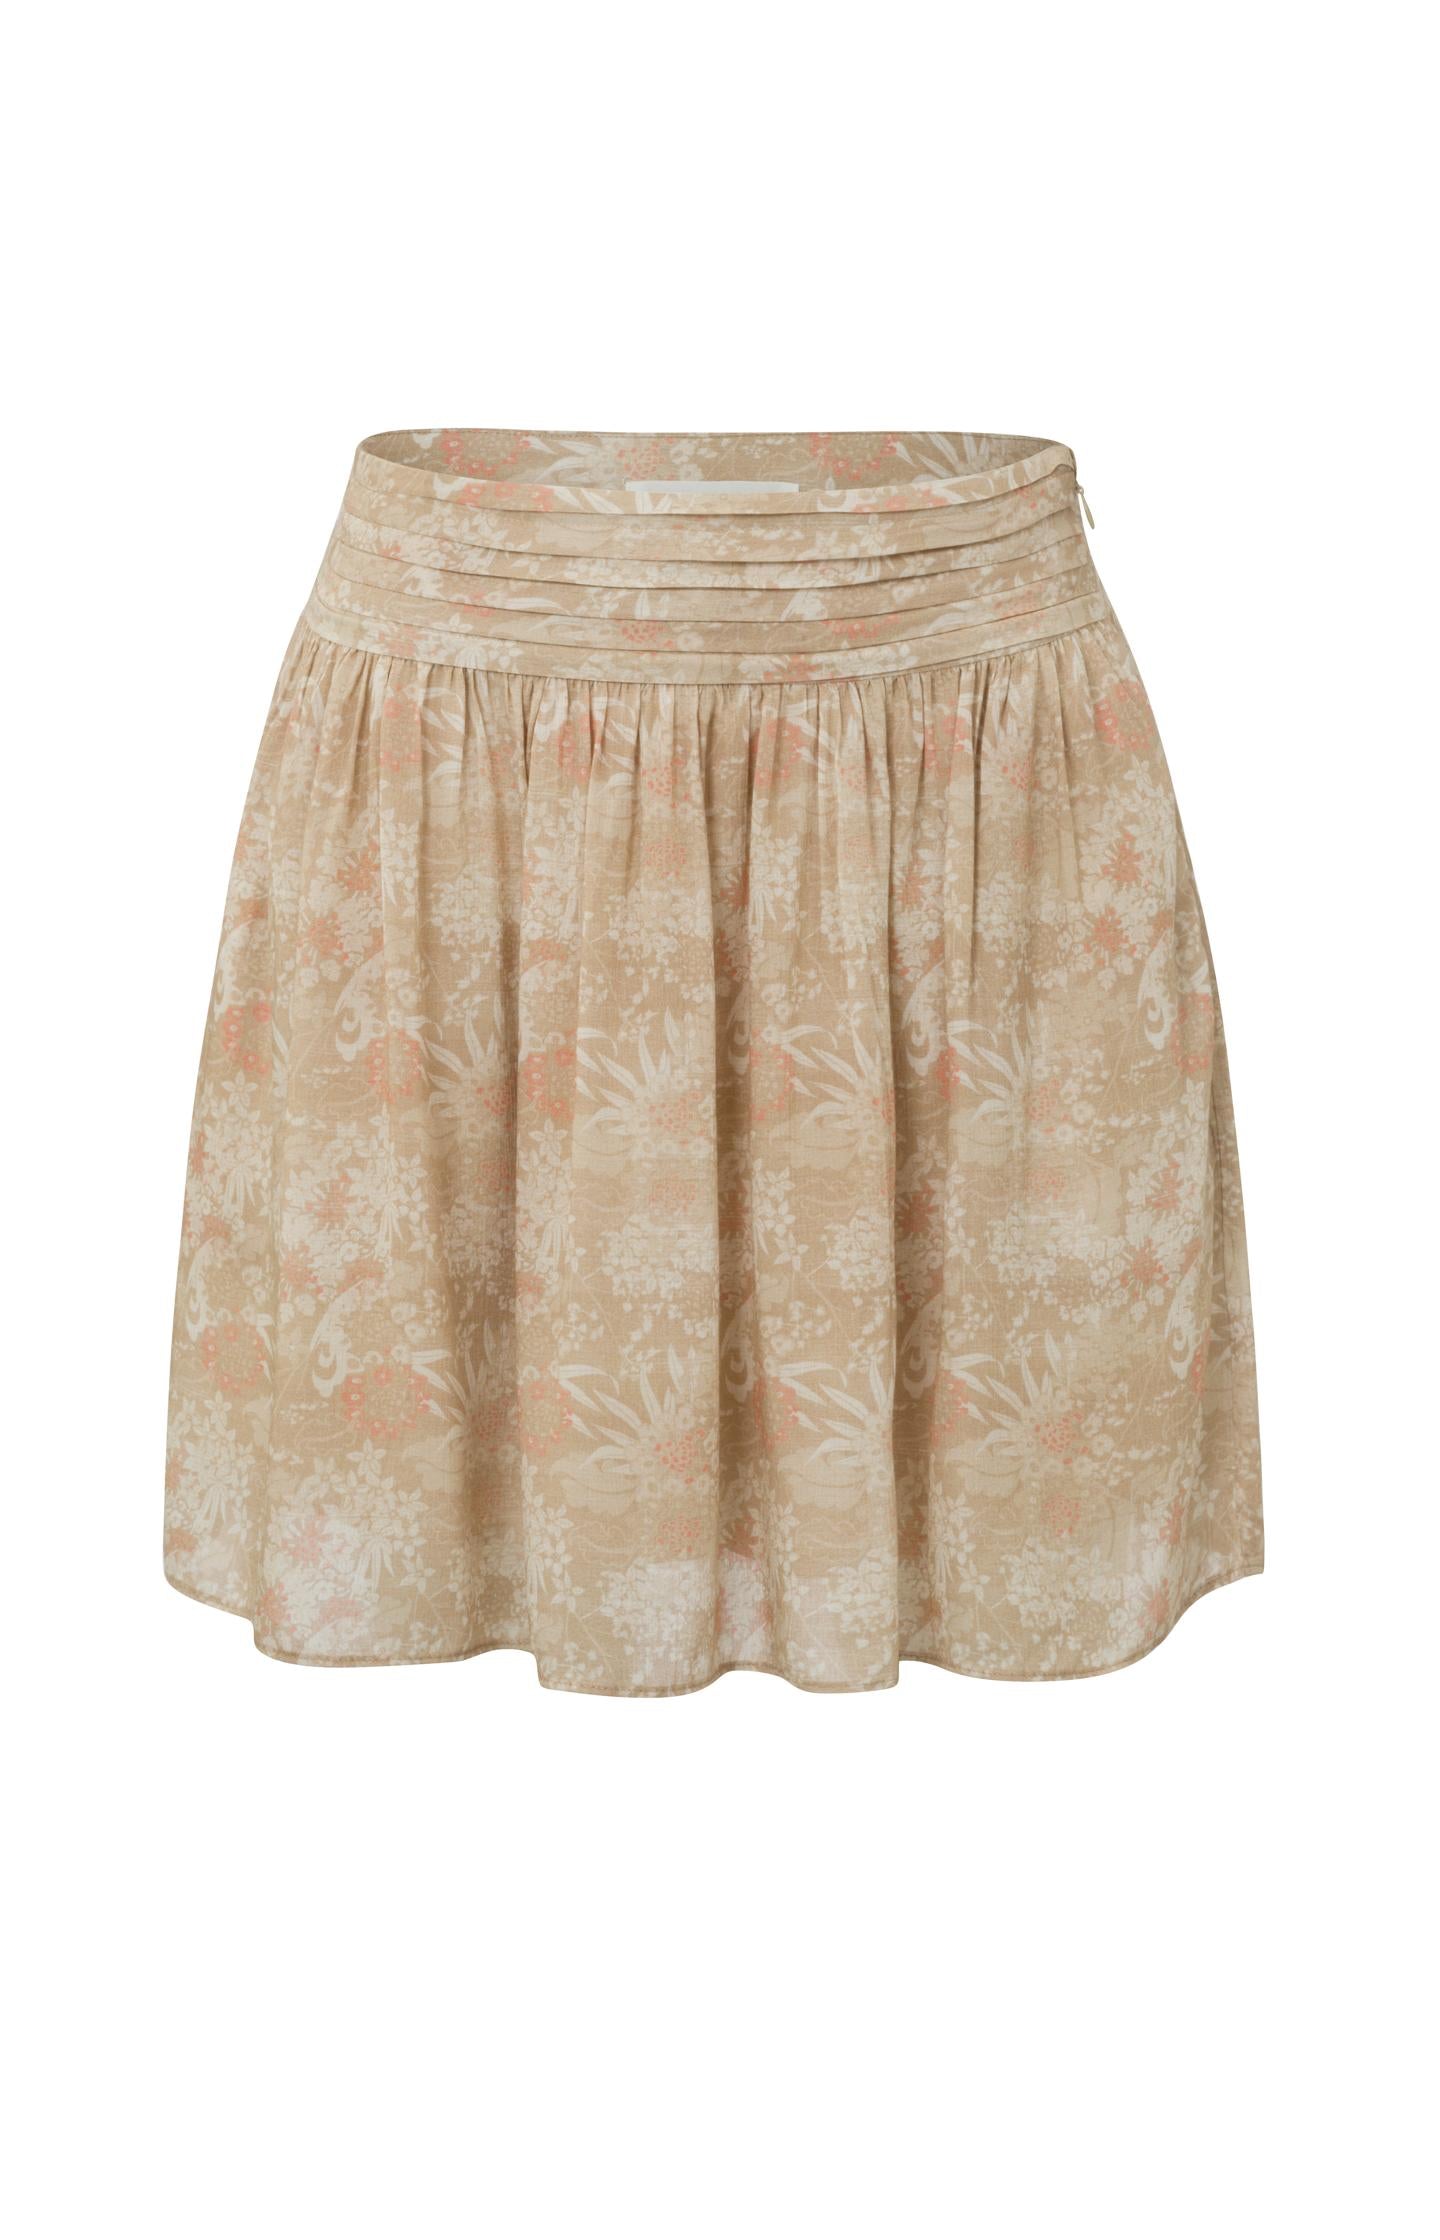 Mini skirt with detailed waist, zipper and floral print - Type: product